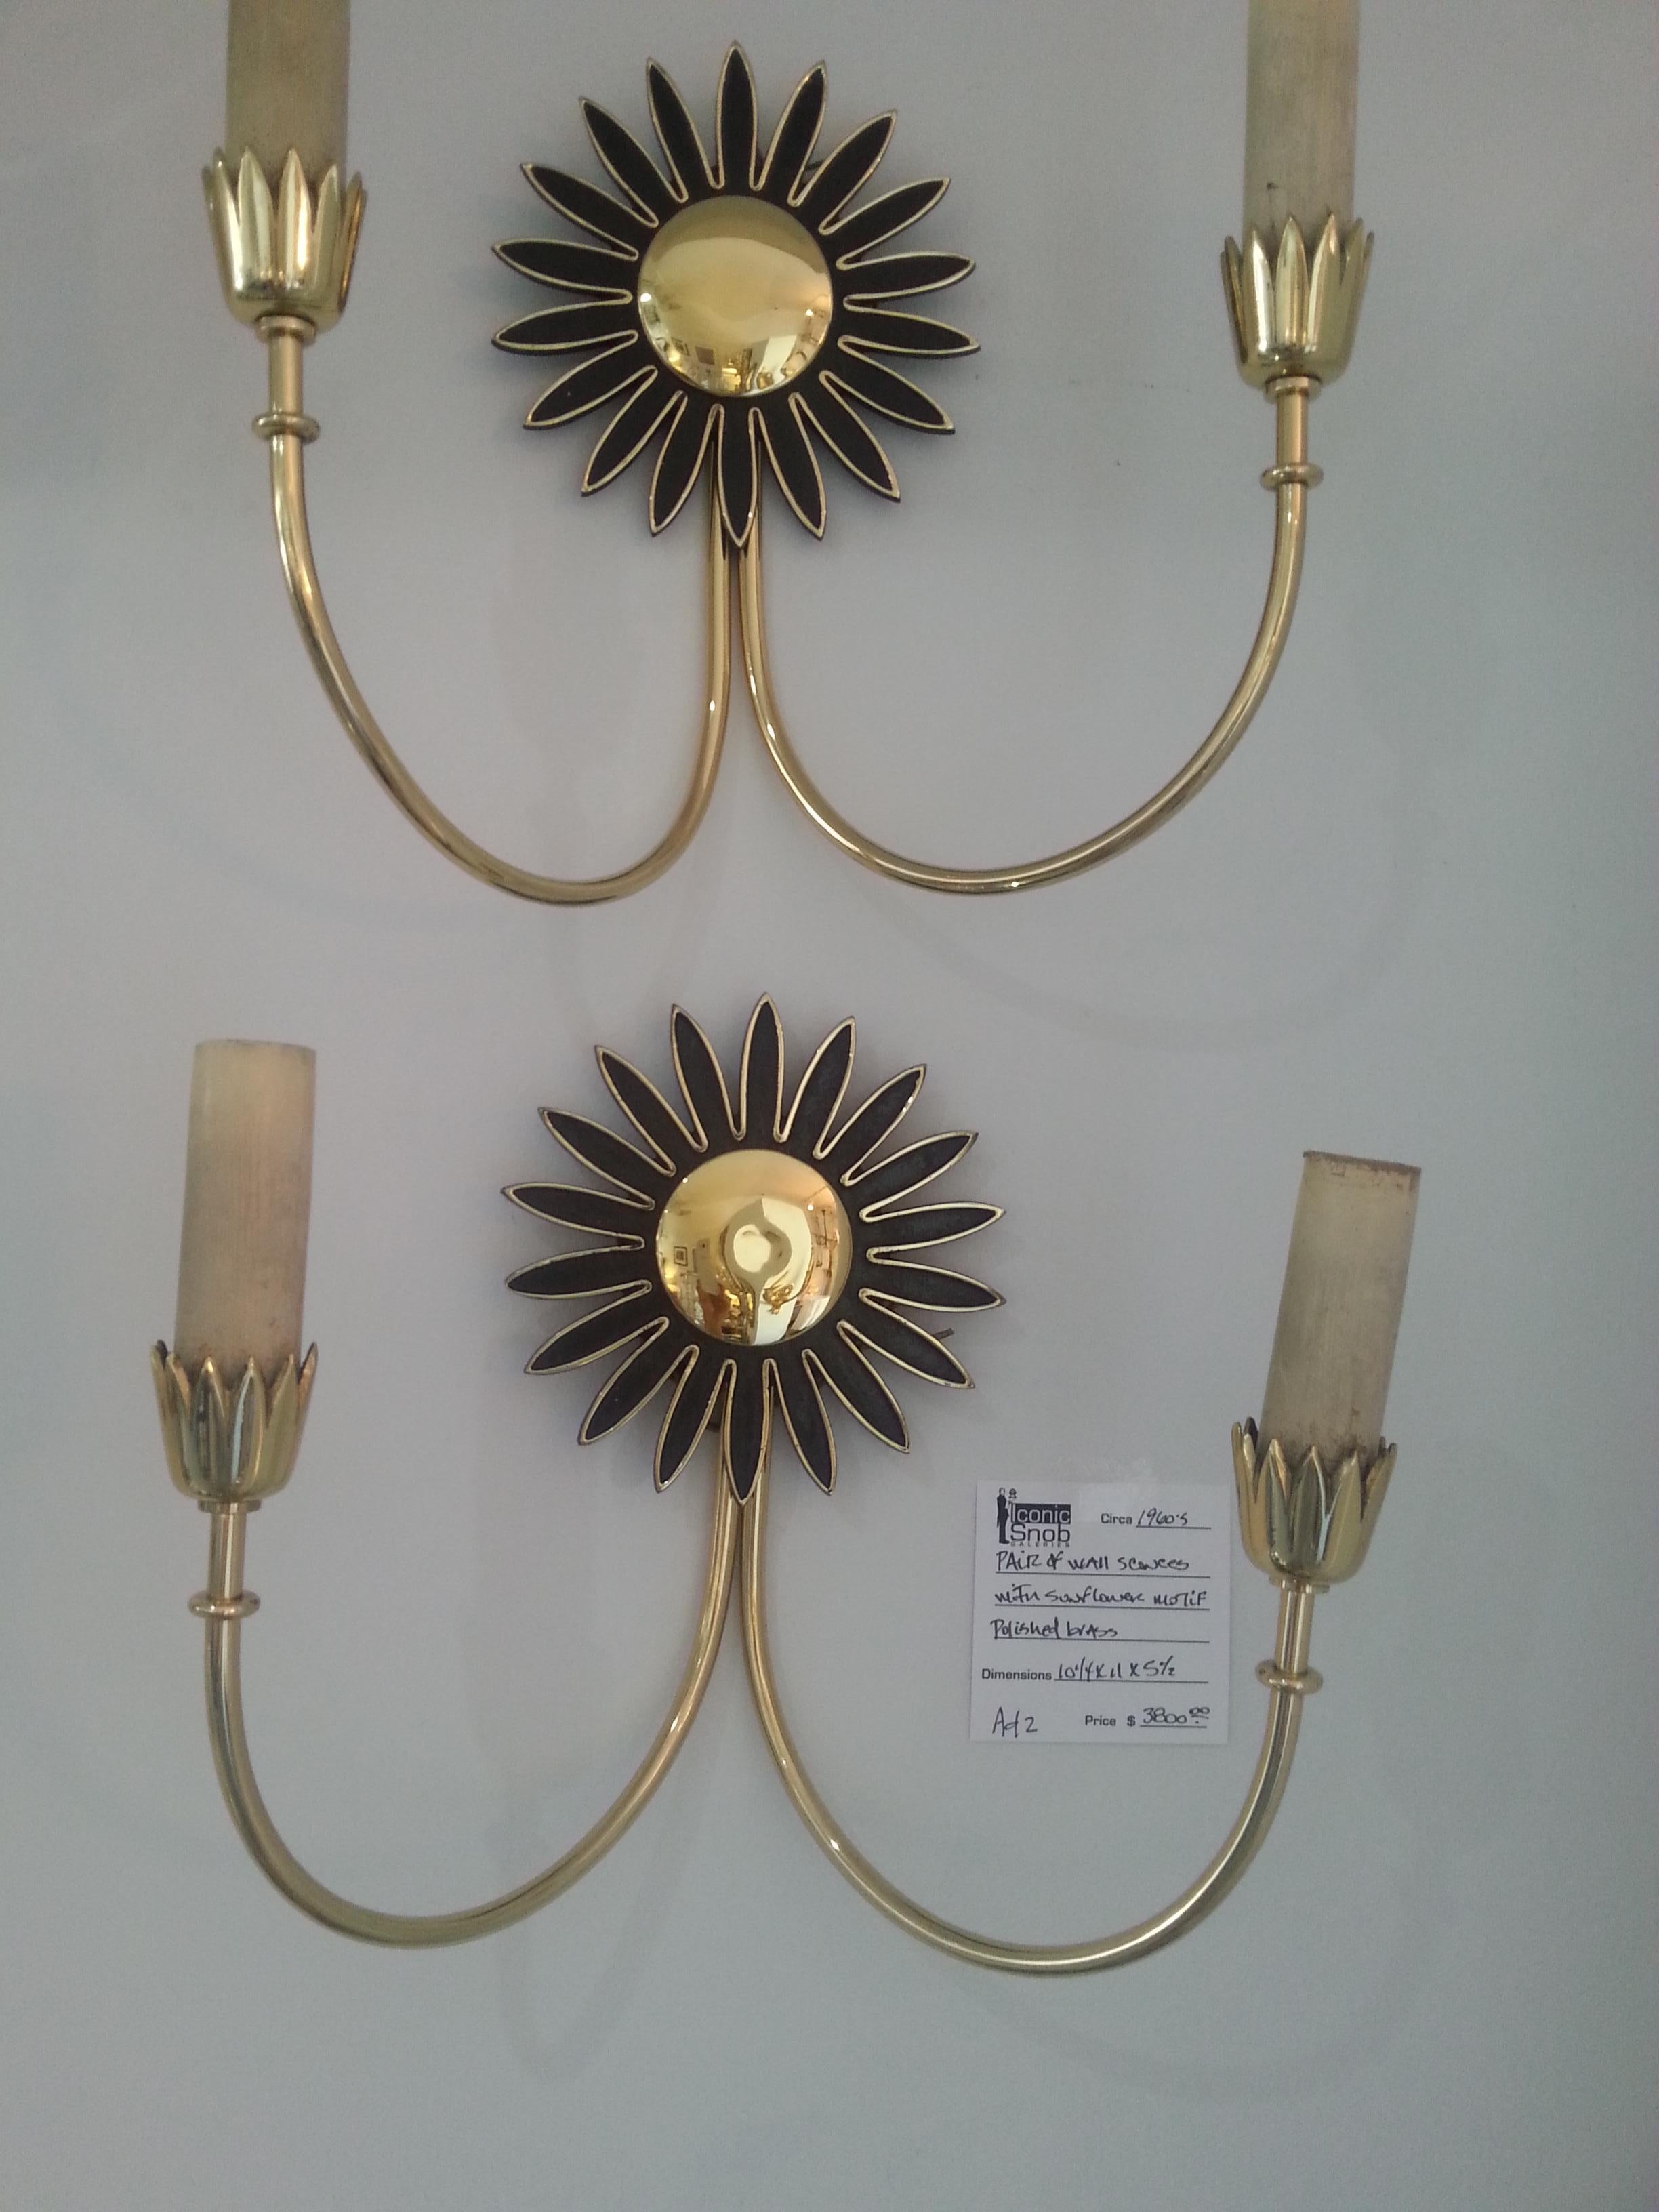 This stylish and chic pair of wall sconces were purchased in Rome, Italy and date to the 1960s. They have been professionally polished and have a clear lacquer finish so no tarnishing in the future. And the candle sleeves are carved wood that can be